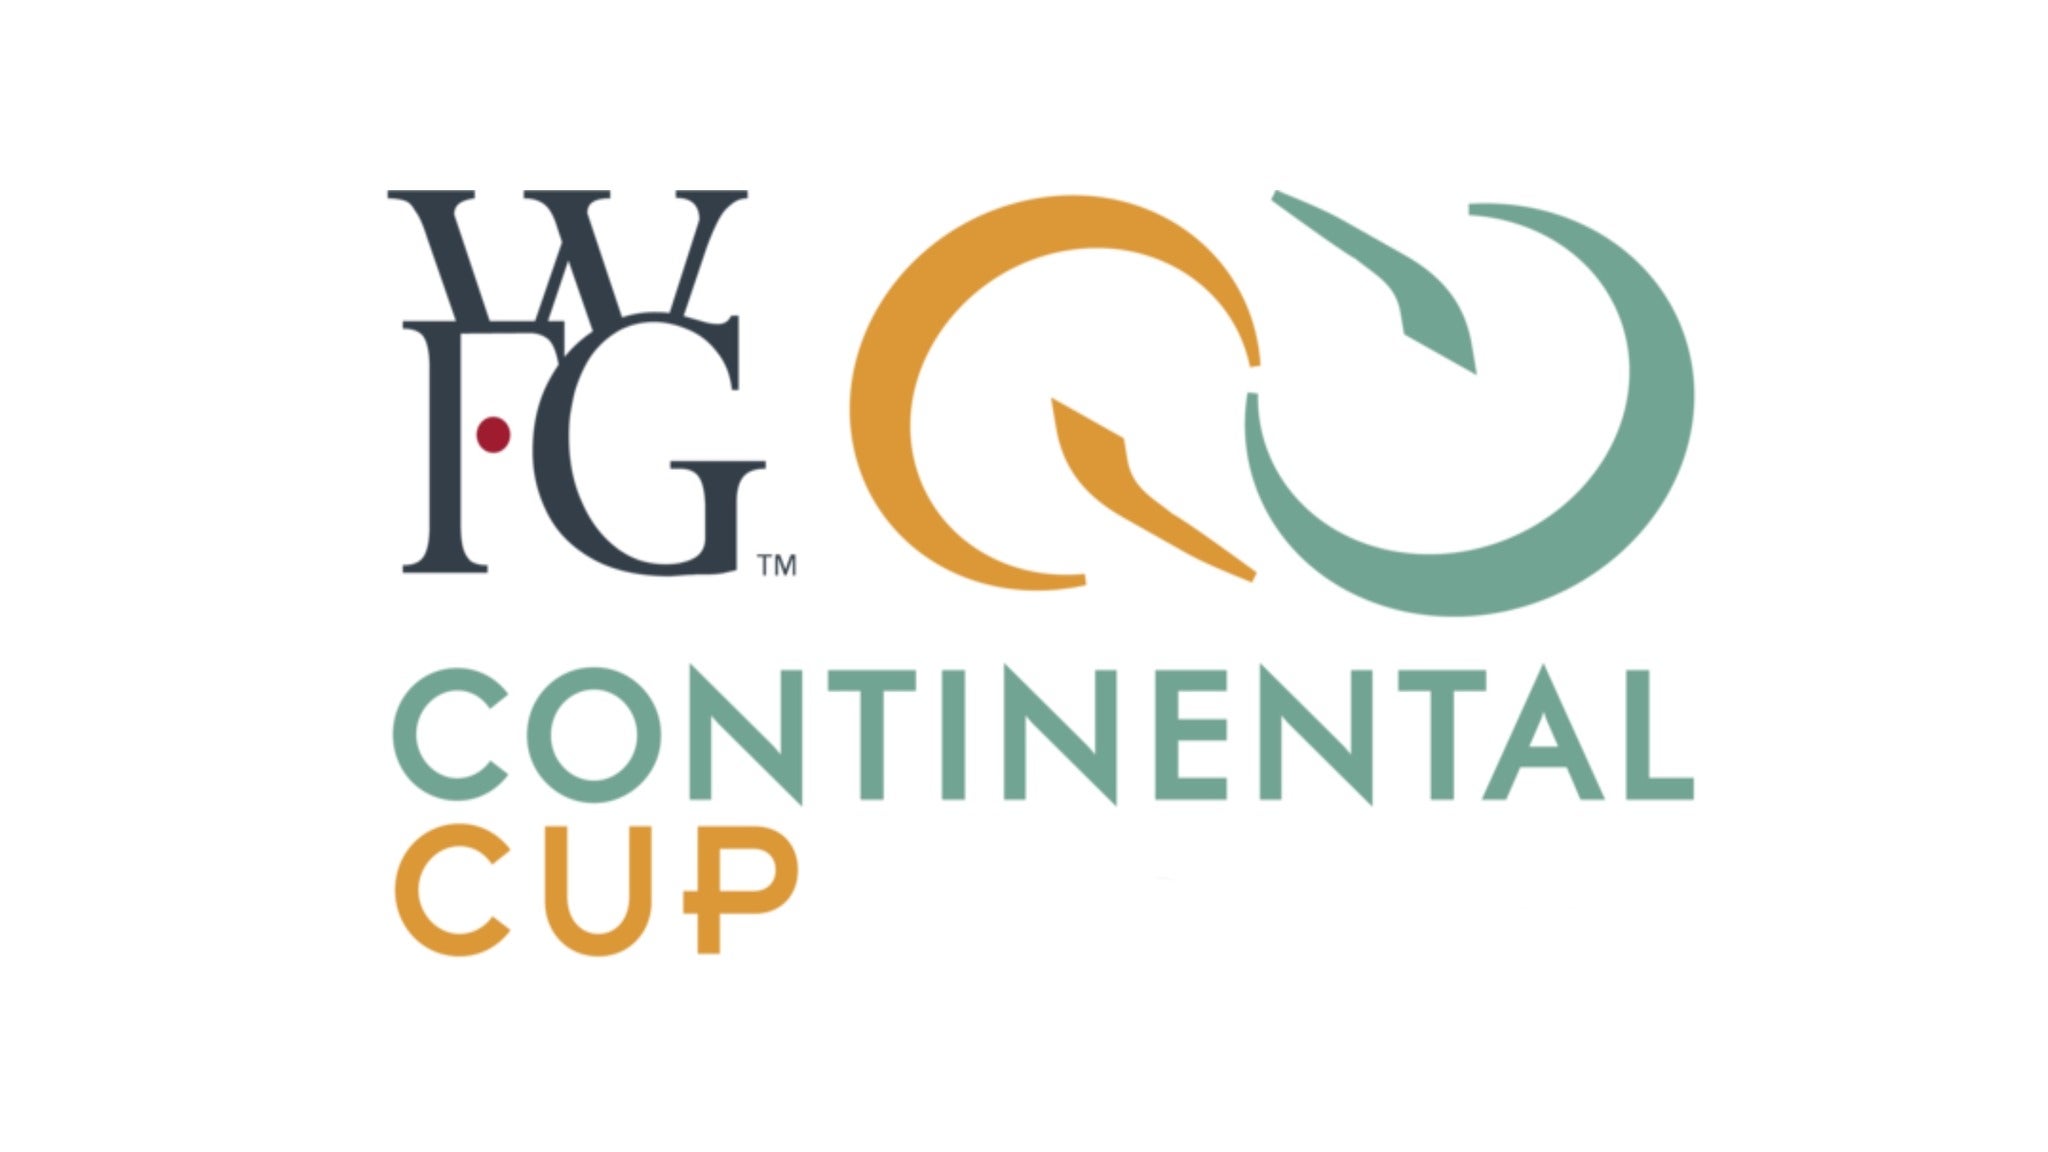 WFG Continental Cup of Curling Tickets Single Game Tickets & Schedule